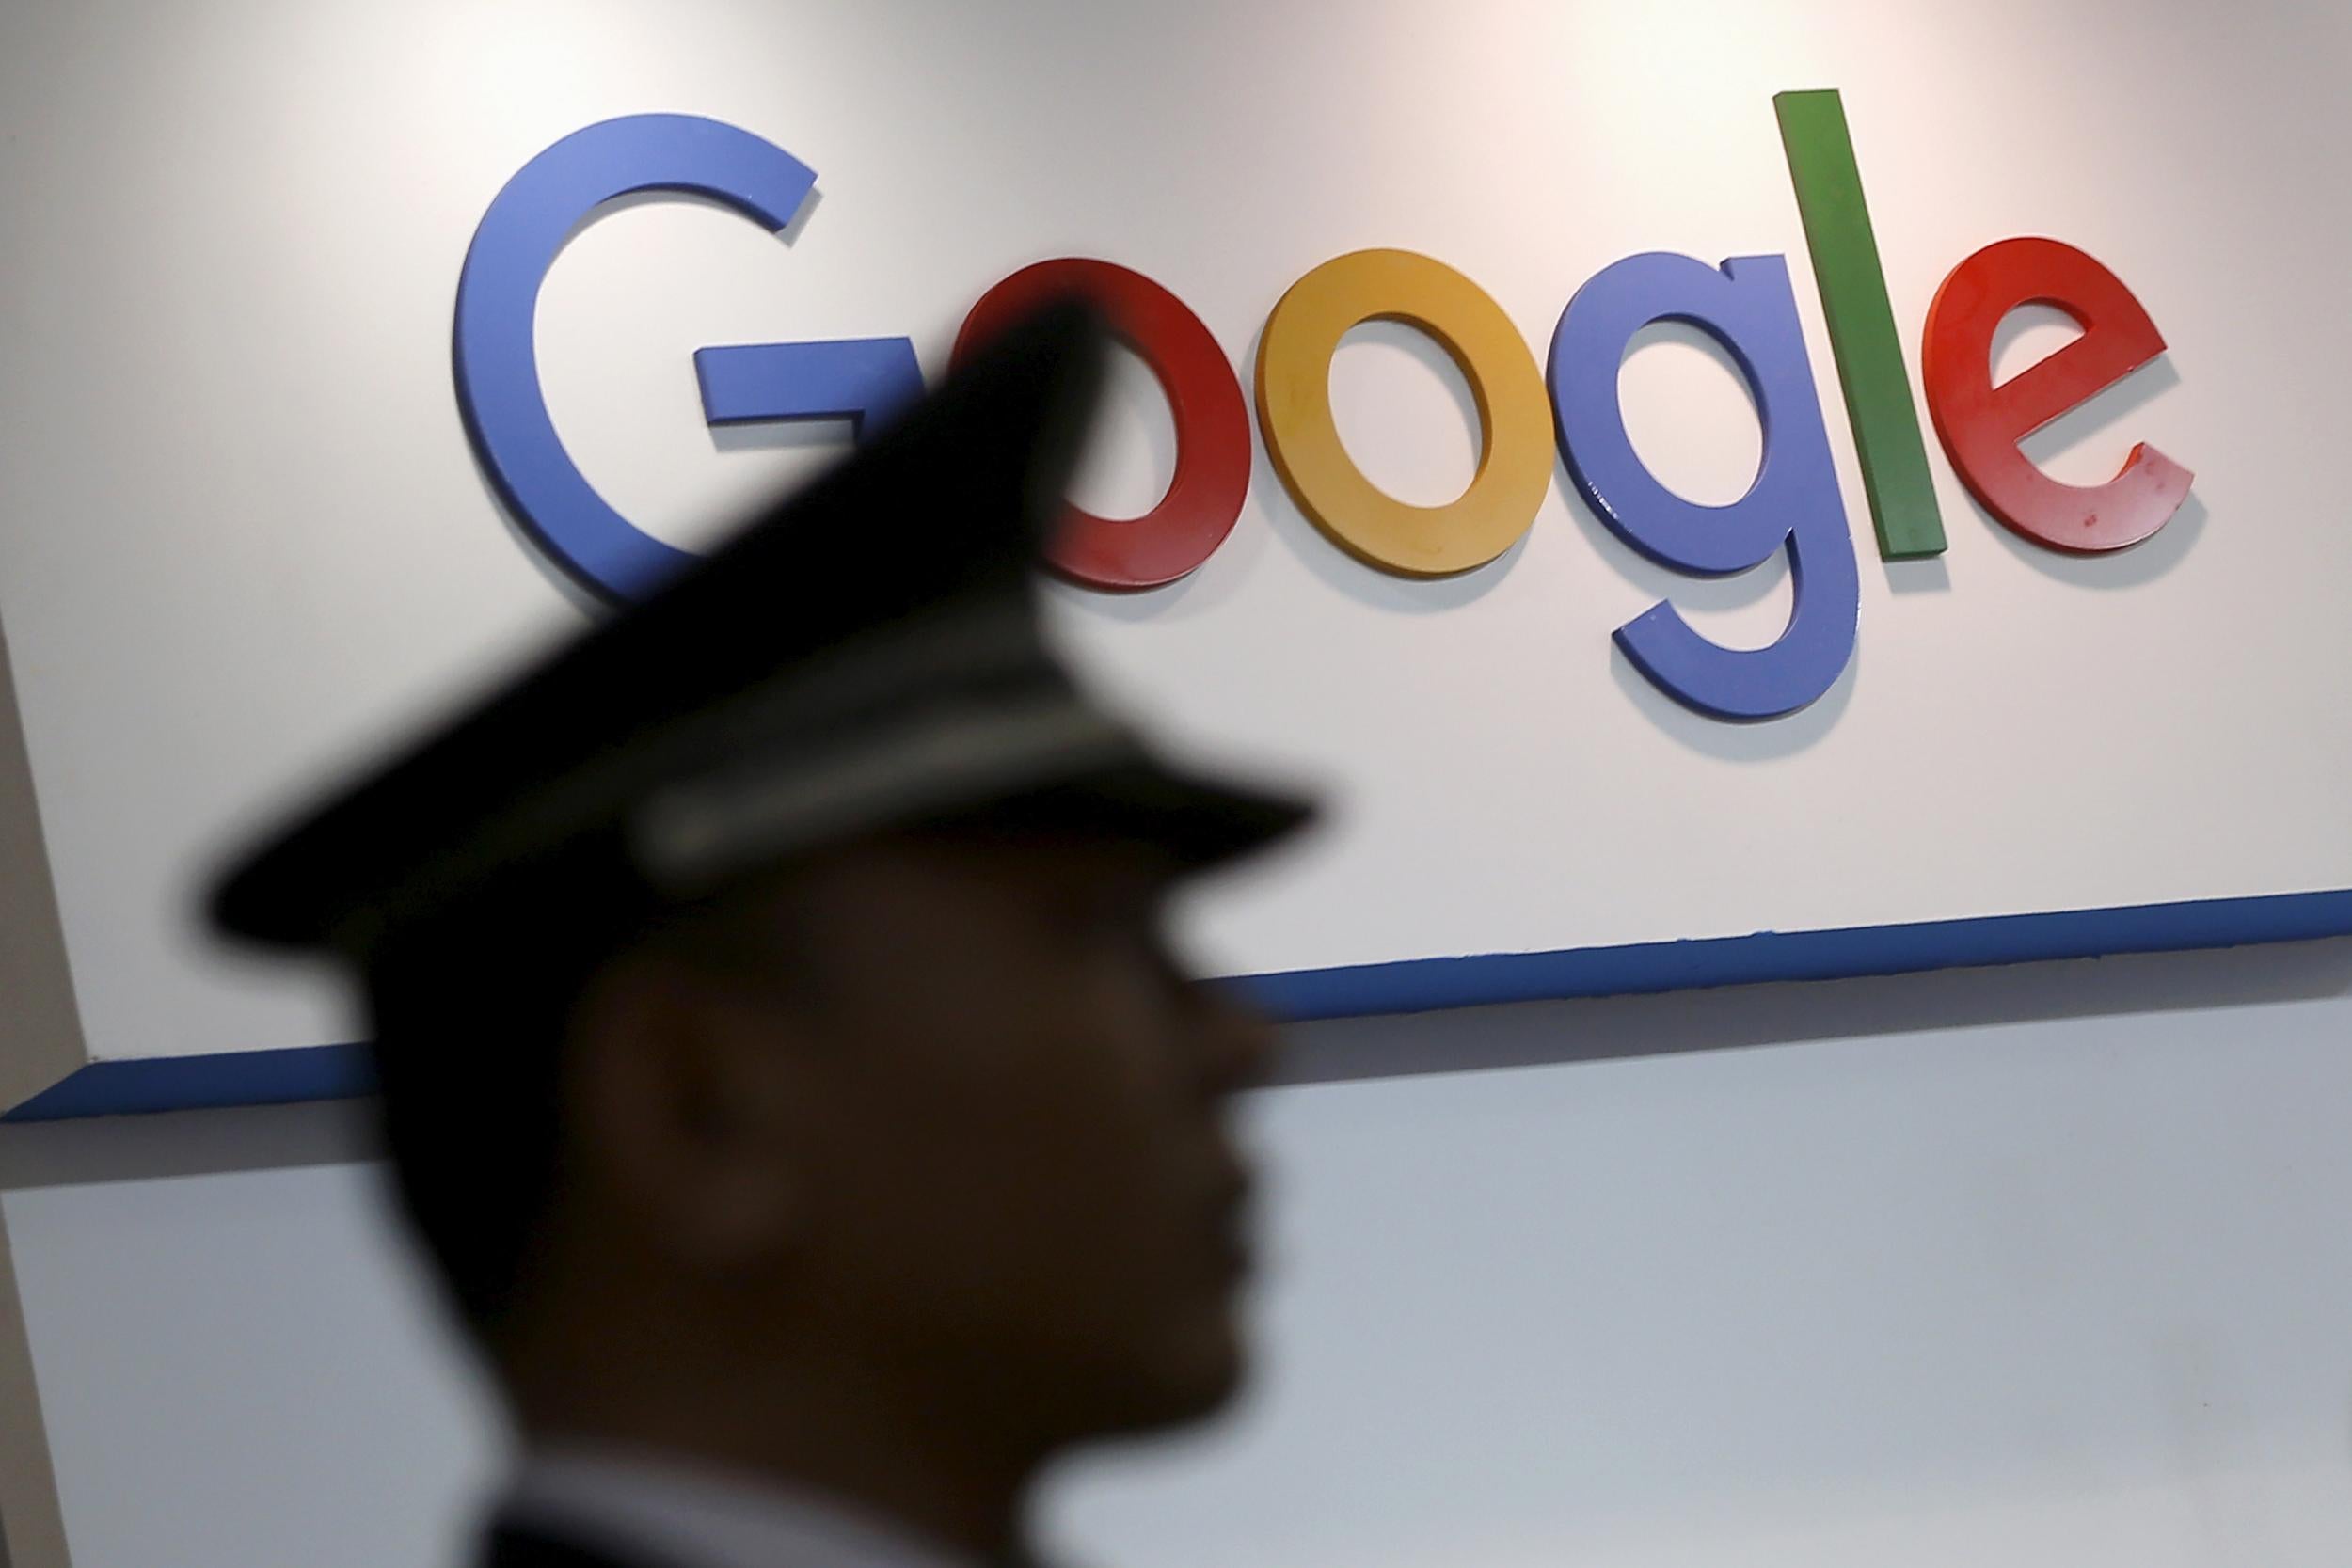 A security guard walks past a logo of Google at a technology fair in Shanghai, China, April 21, 2016